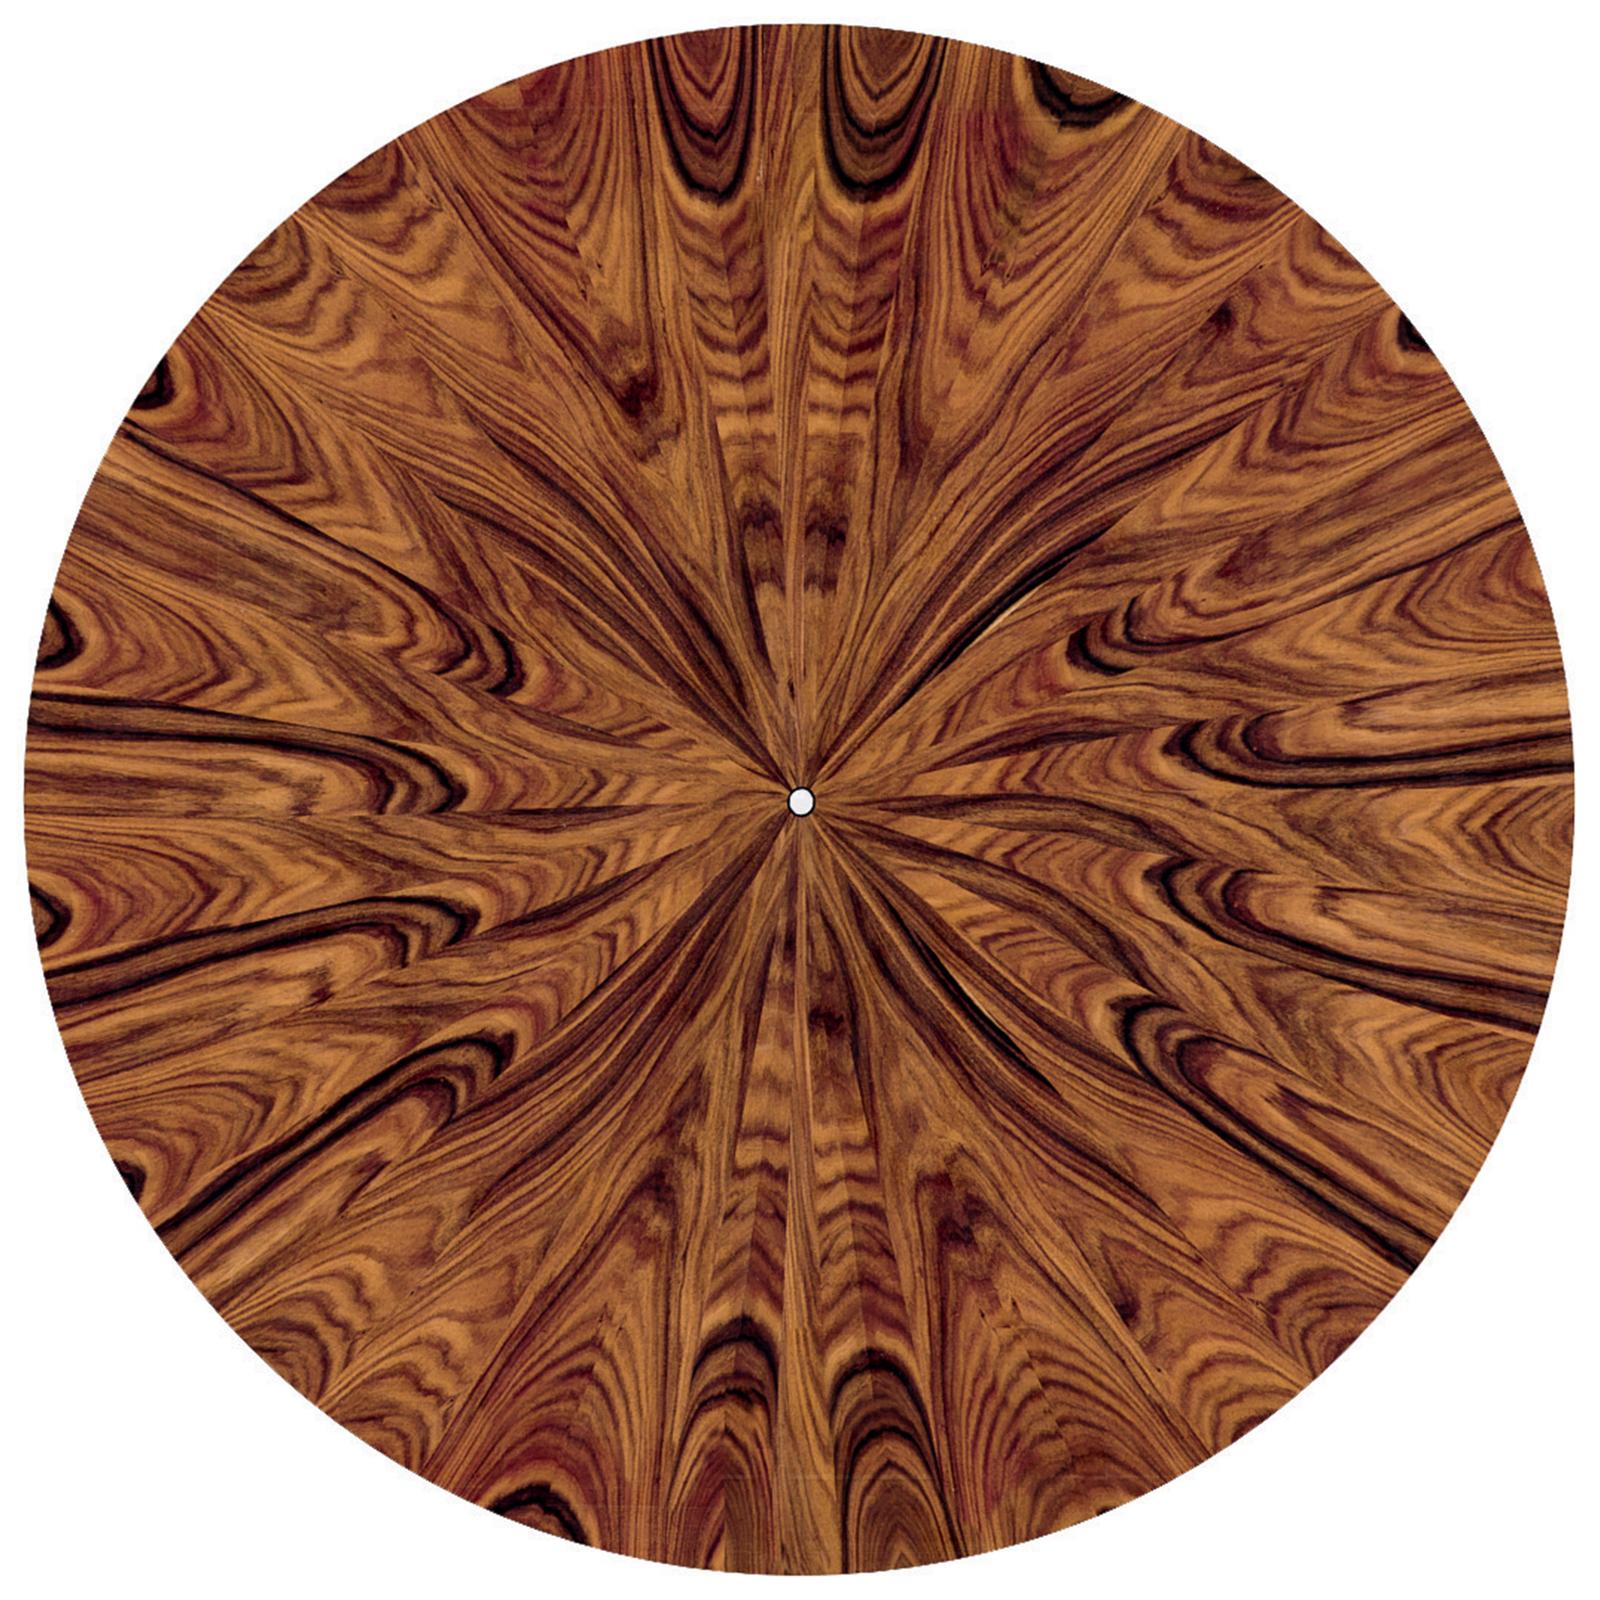 Expertly combining tradition and modernity, the attractive design of the new Oscar Collection adapts to settings with an exquisitely contemporary and cosmopolitan flavor. Featuring sophisticated elements, such as Santos rosewood, this Round Table